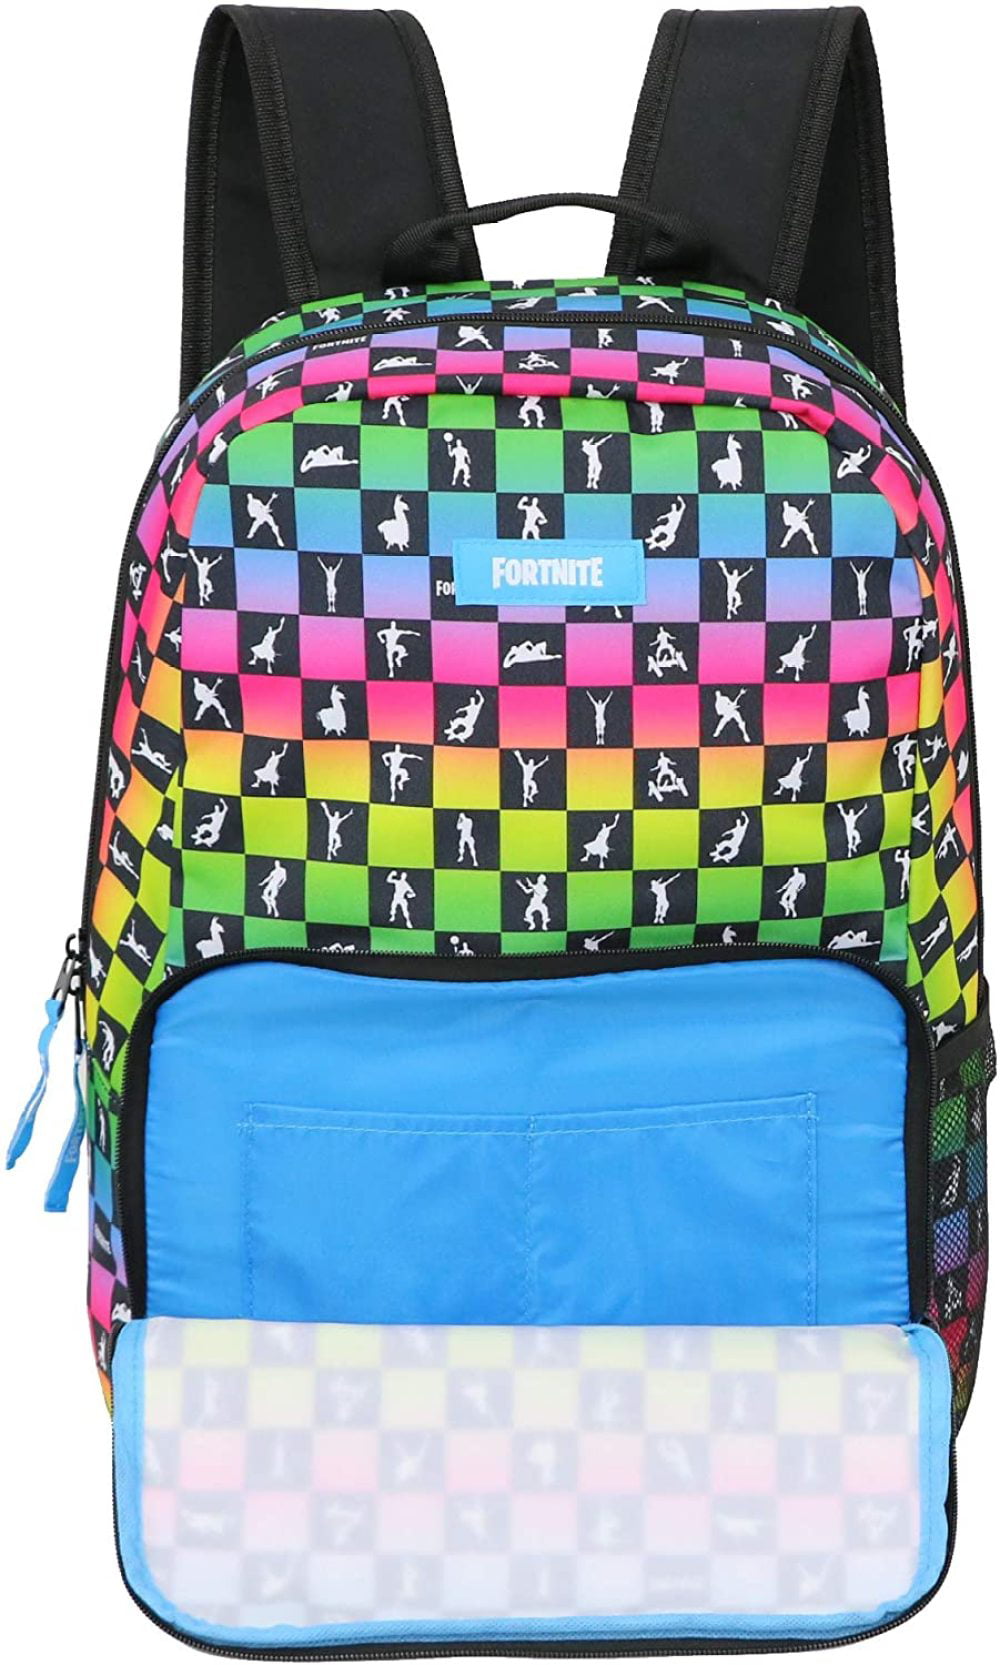 Fortnite Amplify Backpack Bright Combo 